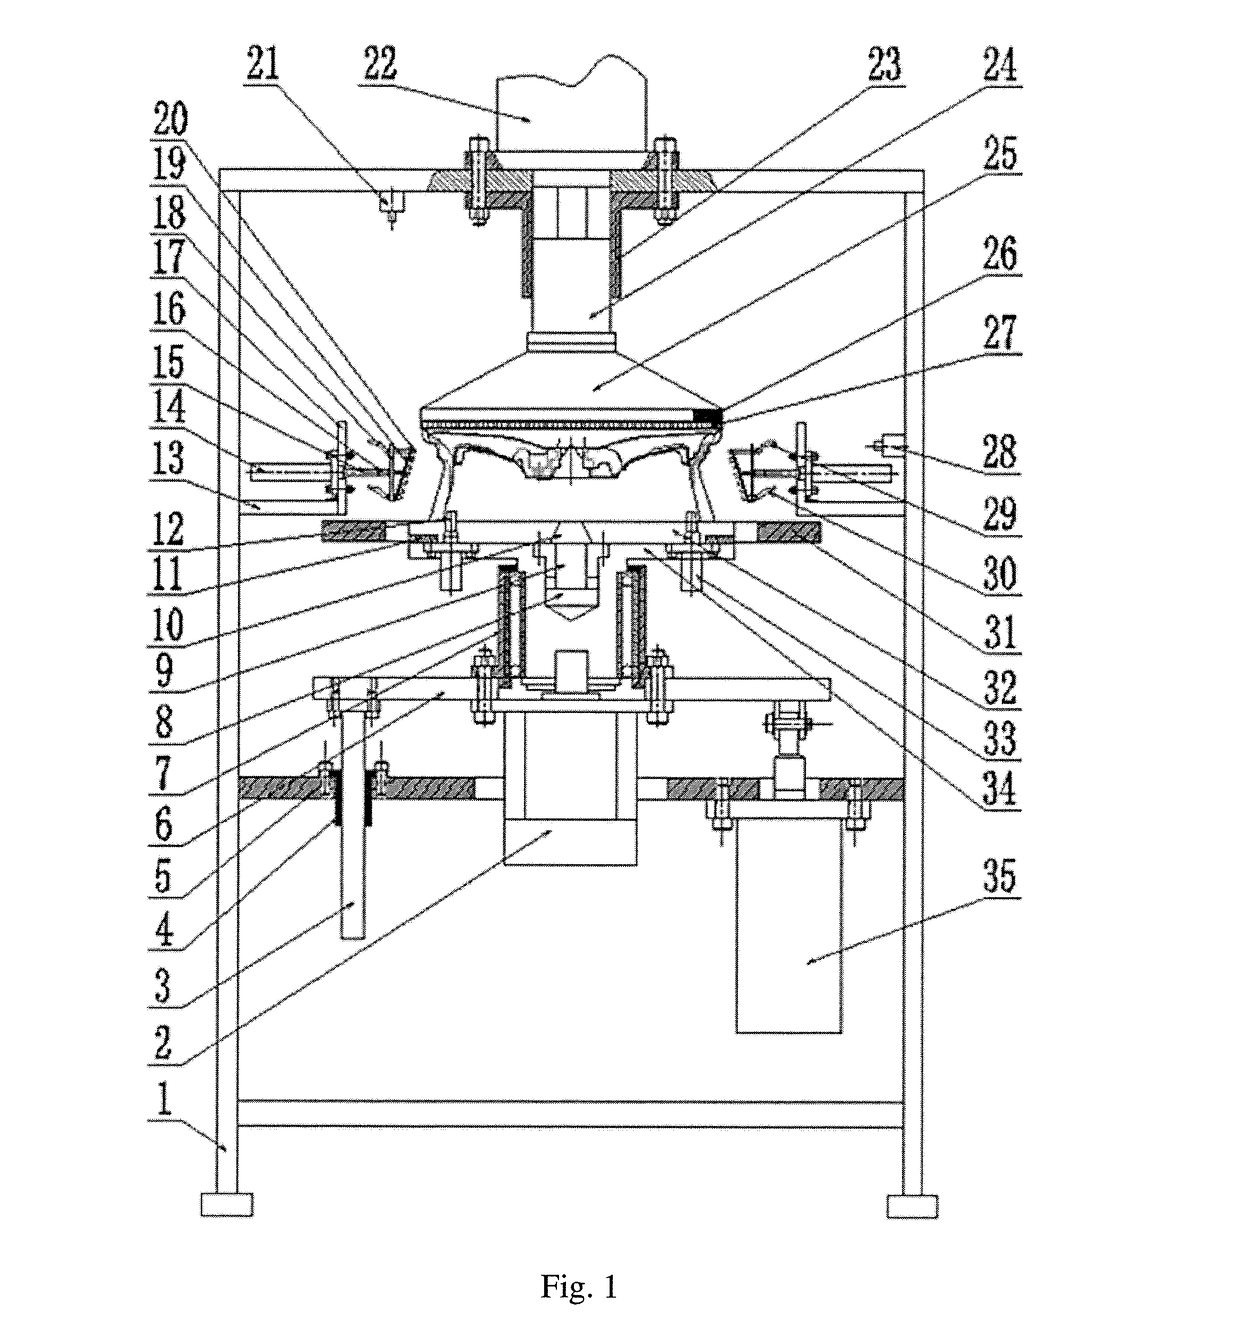 On-line induction heating device for wheel blank